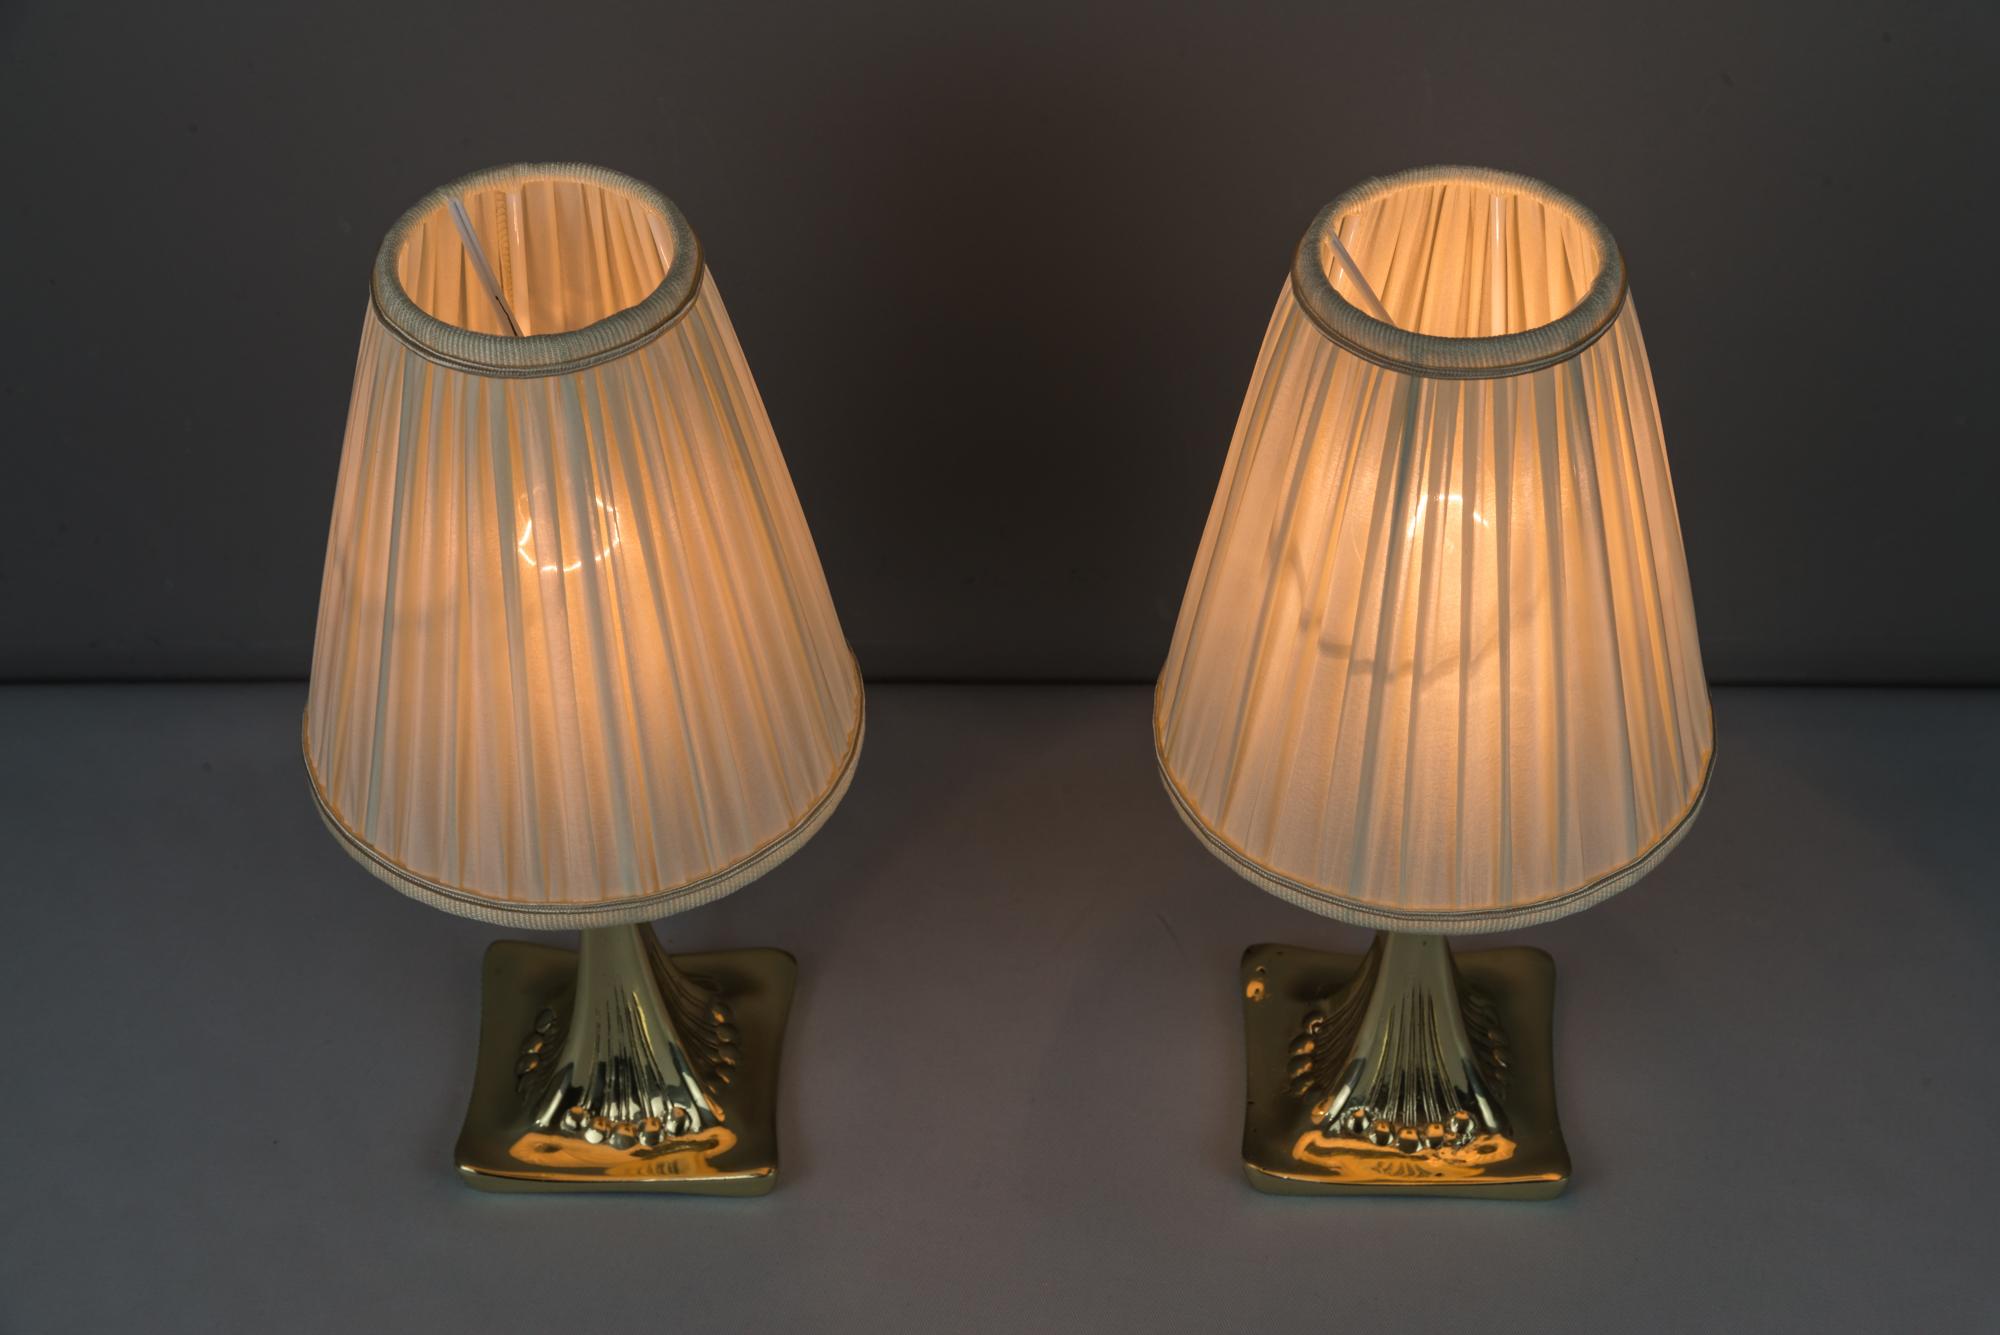 Fabric Two Jugendstil Table Lamps, circa 1908